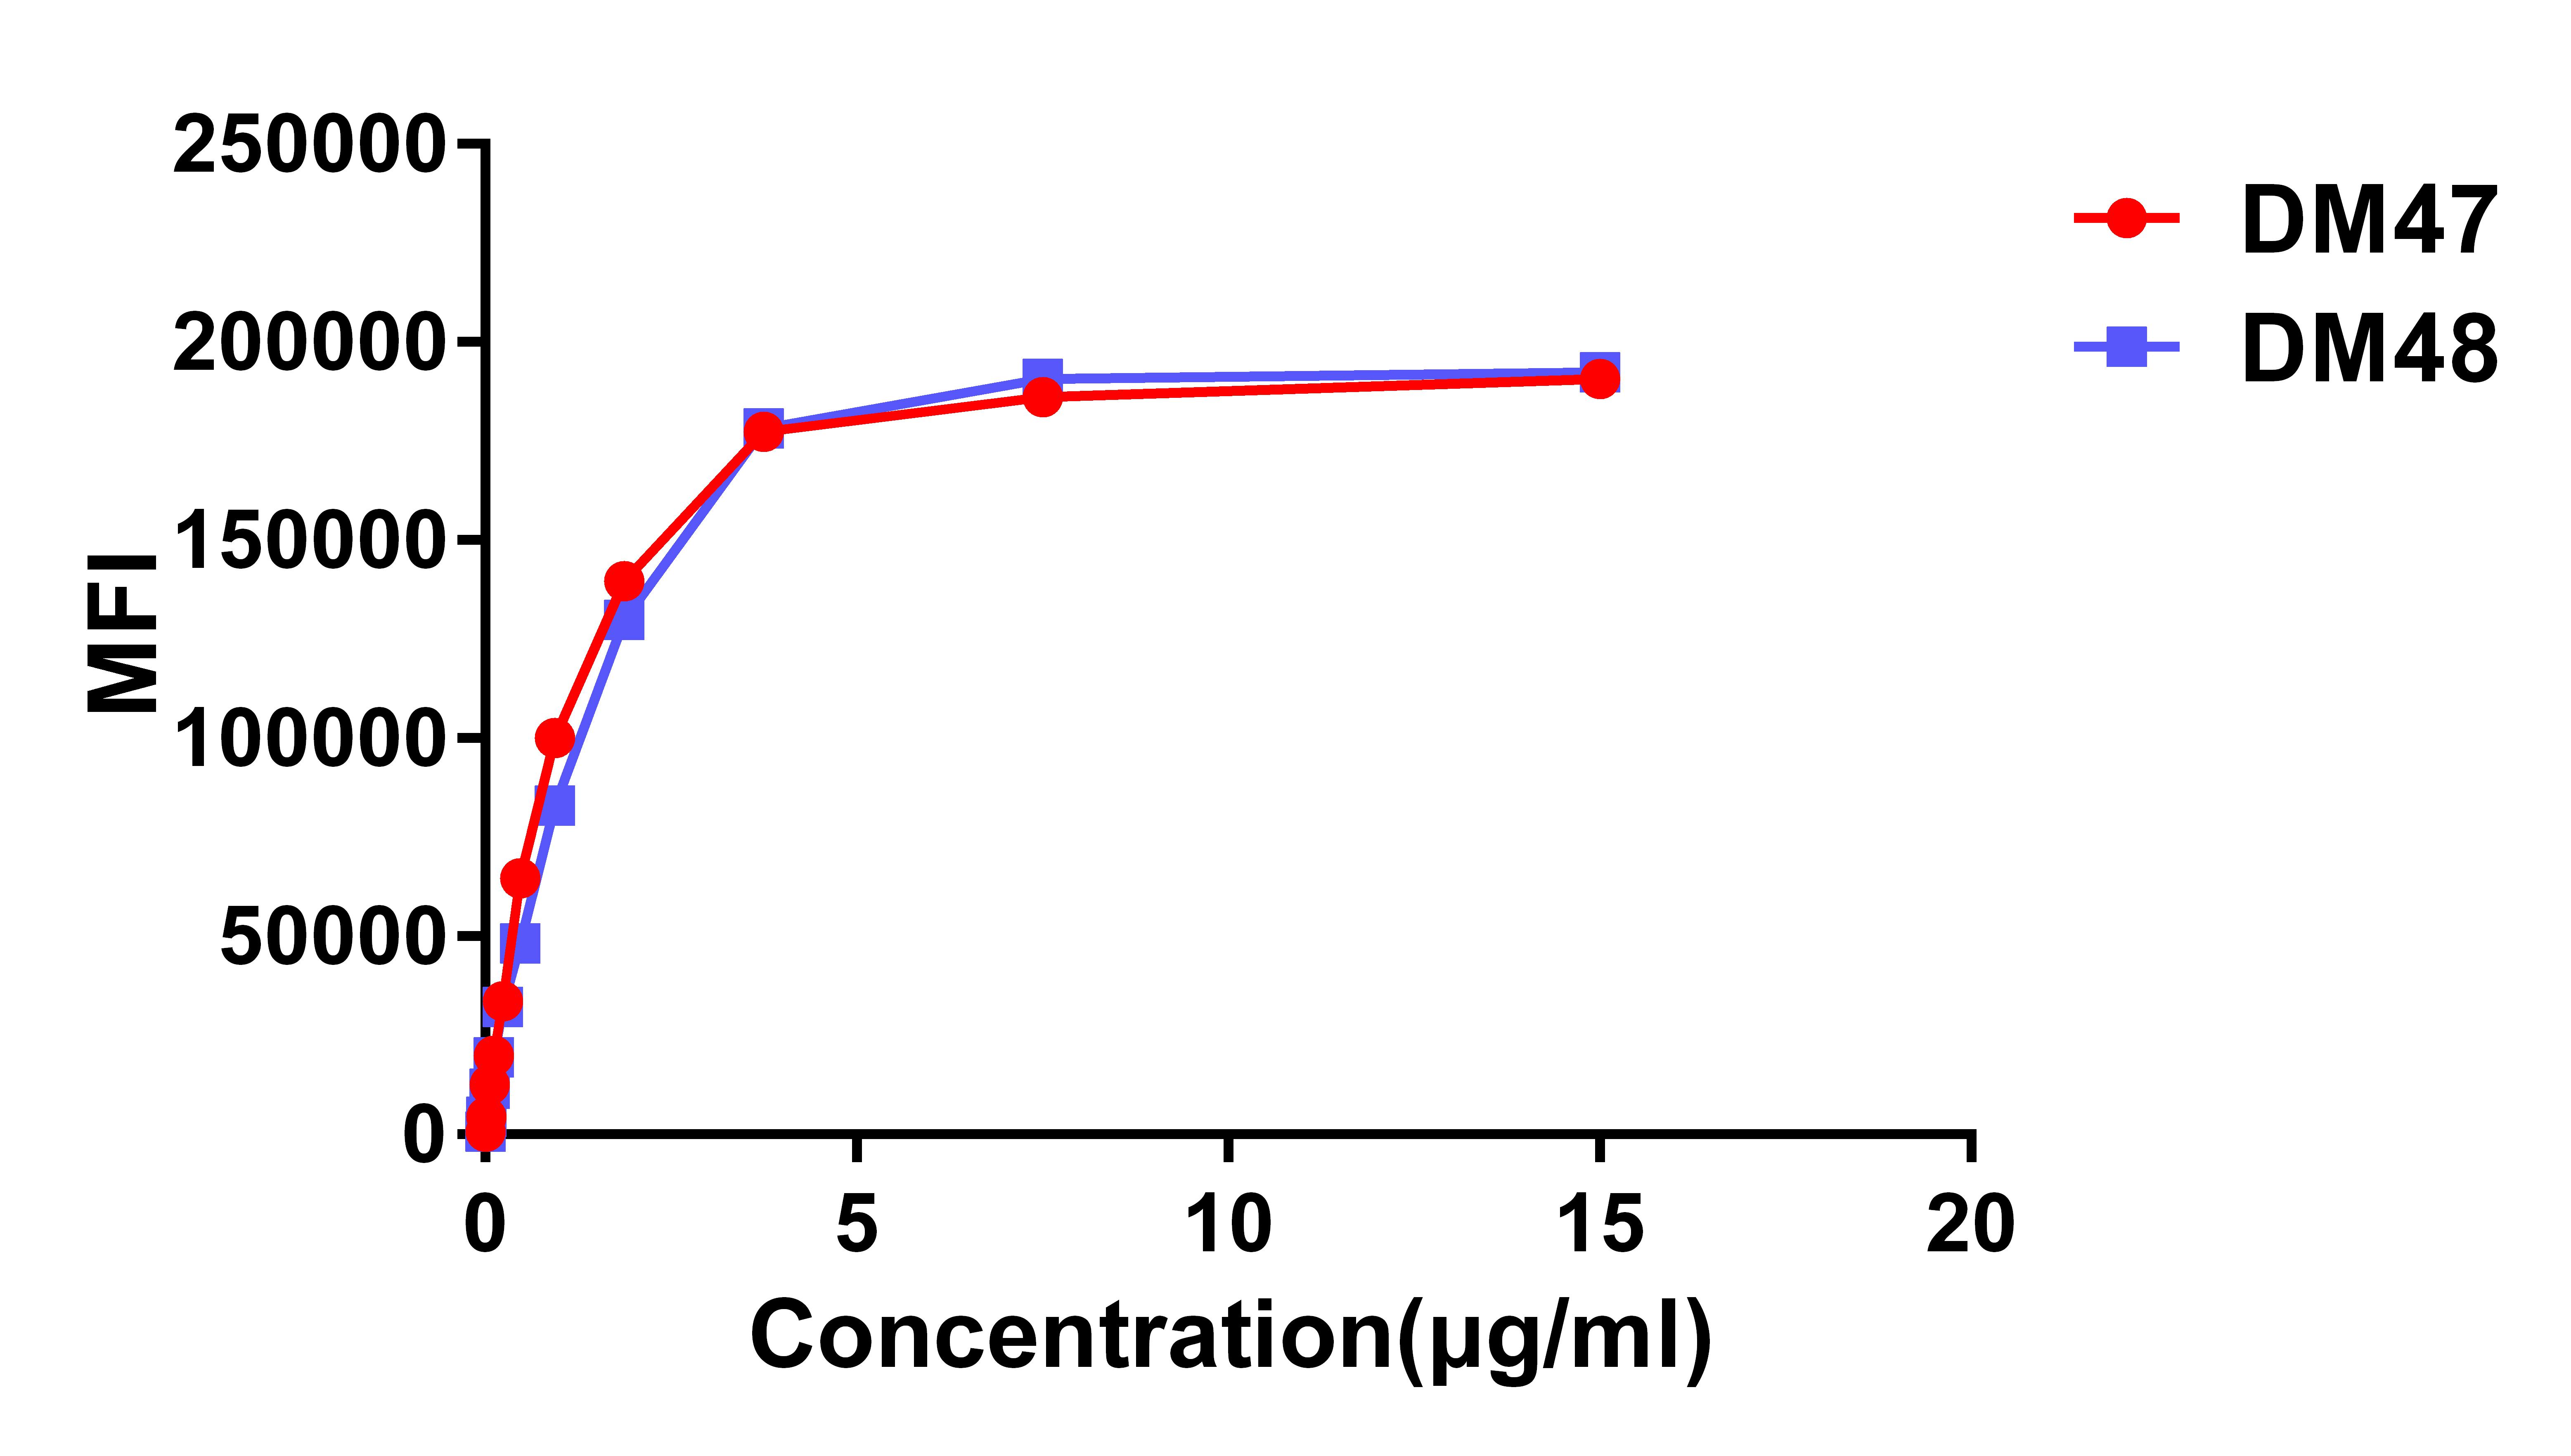 Figure 3. Affinity ranking of different Rabbit anti-ACE2 mAb clones by titration of different concentration onto Expi 293 cell line transfected with human ACE2. The Y-axis represents the mean fluorescence intensity (MFI) while the X-axis represents the concentration of IgG used.